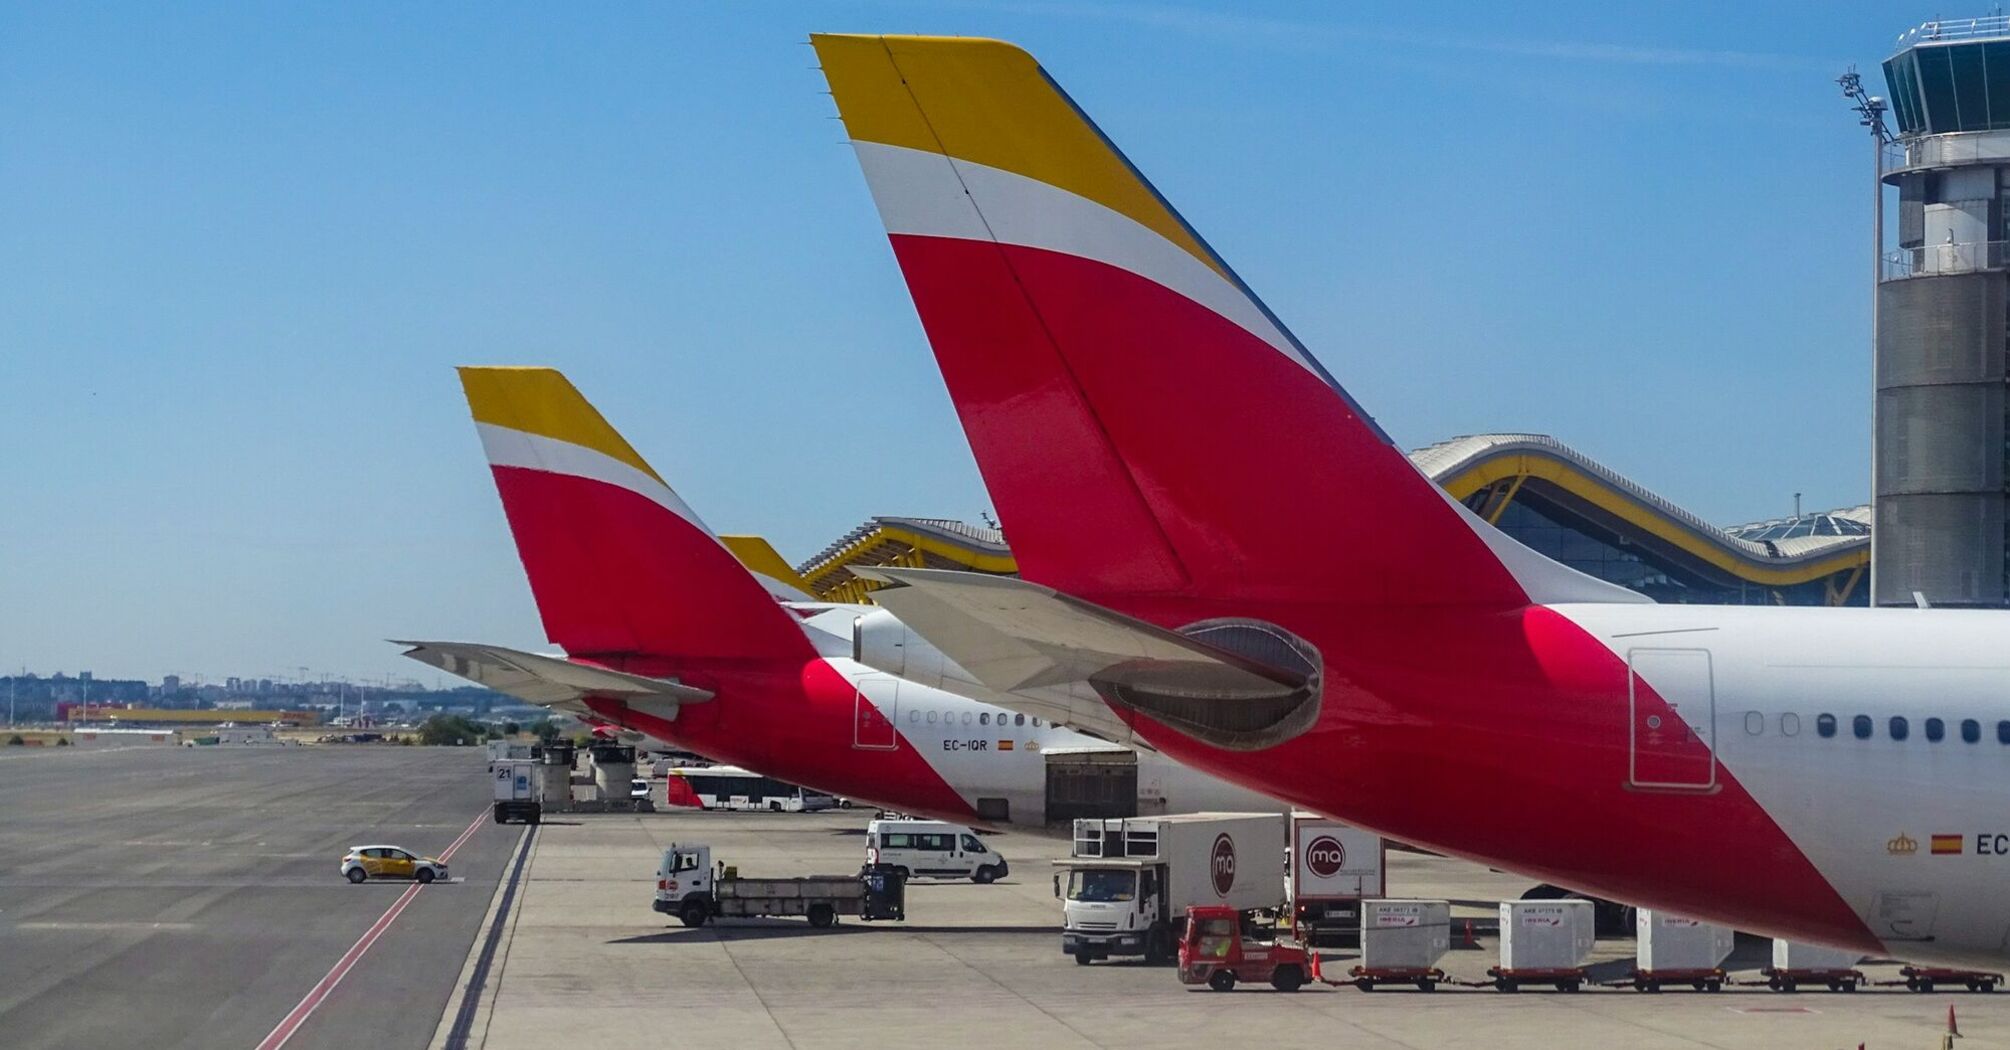 Iberia planes parked at the airport